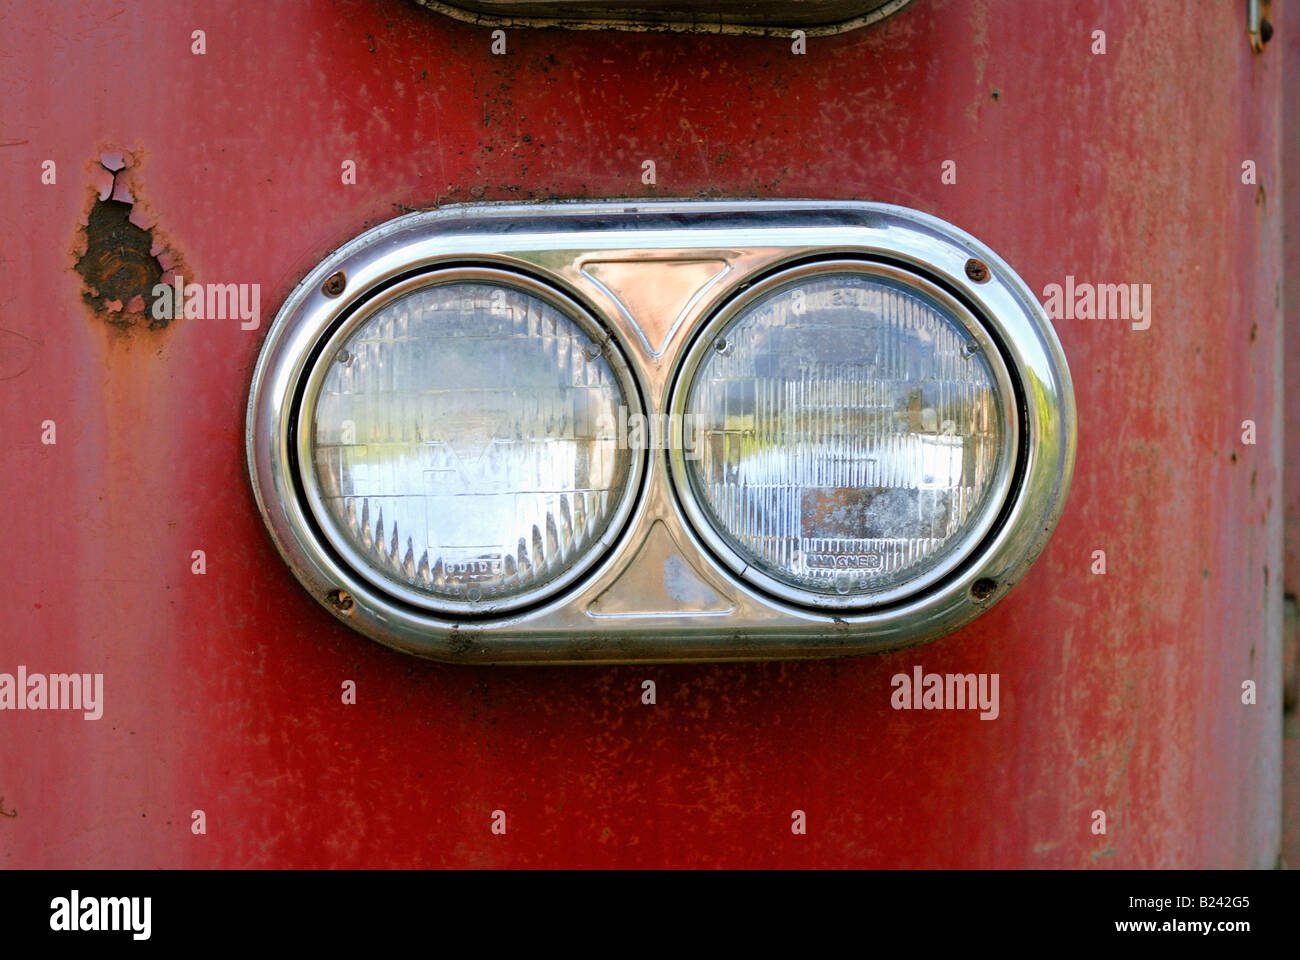 Headlights on an old abandoned fire truck Stock Photo